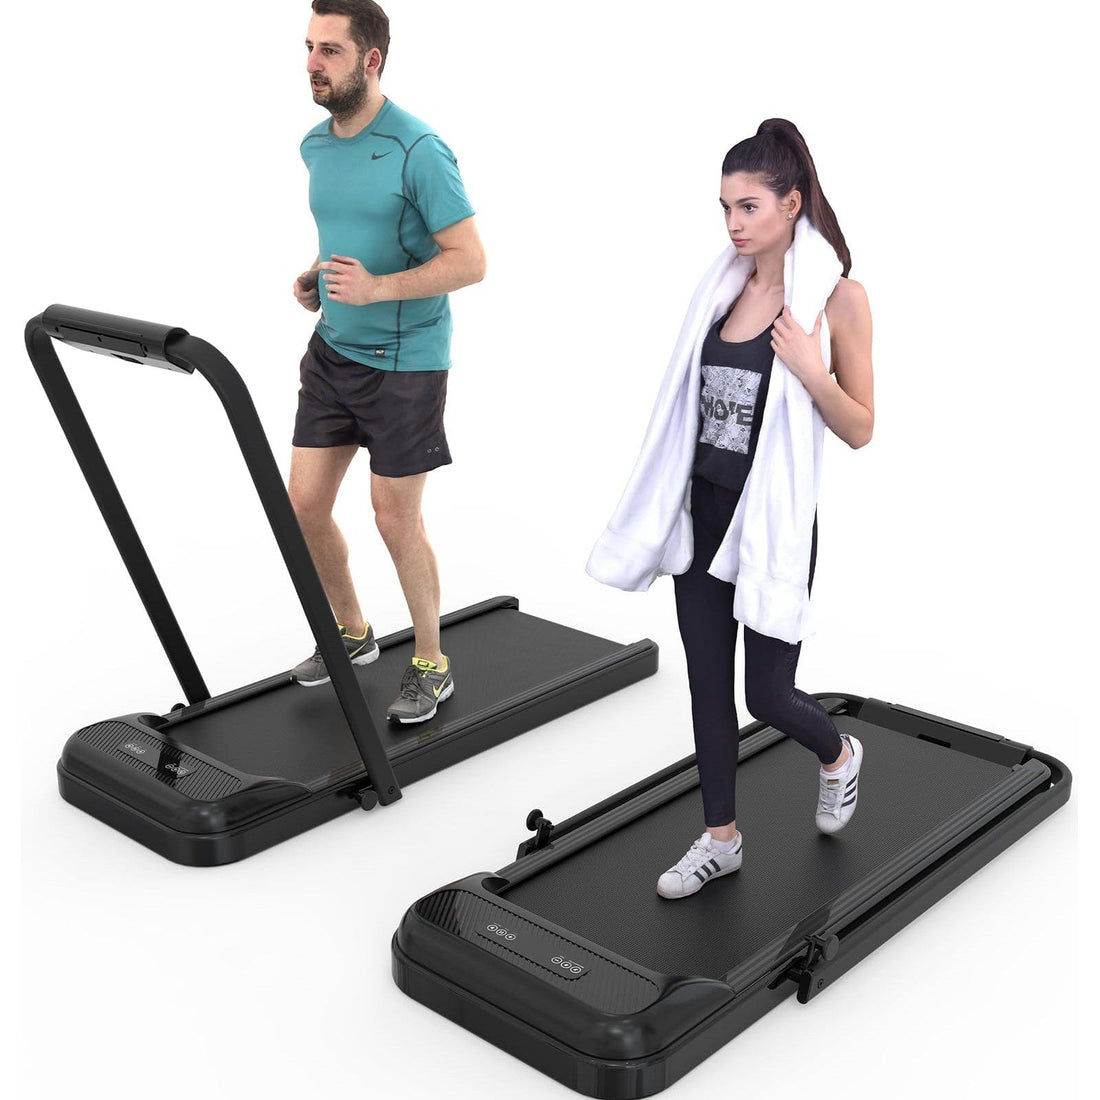 2-in-1 2.25 HP Treadmill 0.6-6.2 MPH, LCD Display for Fitness - GARVEE